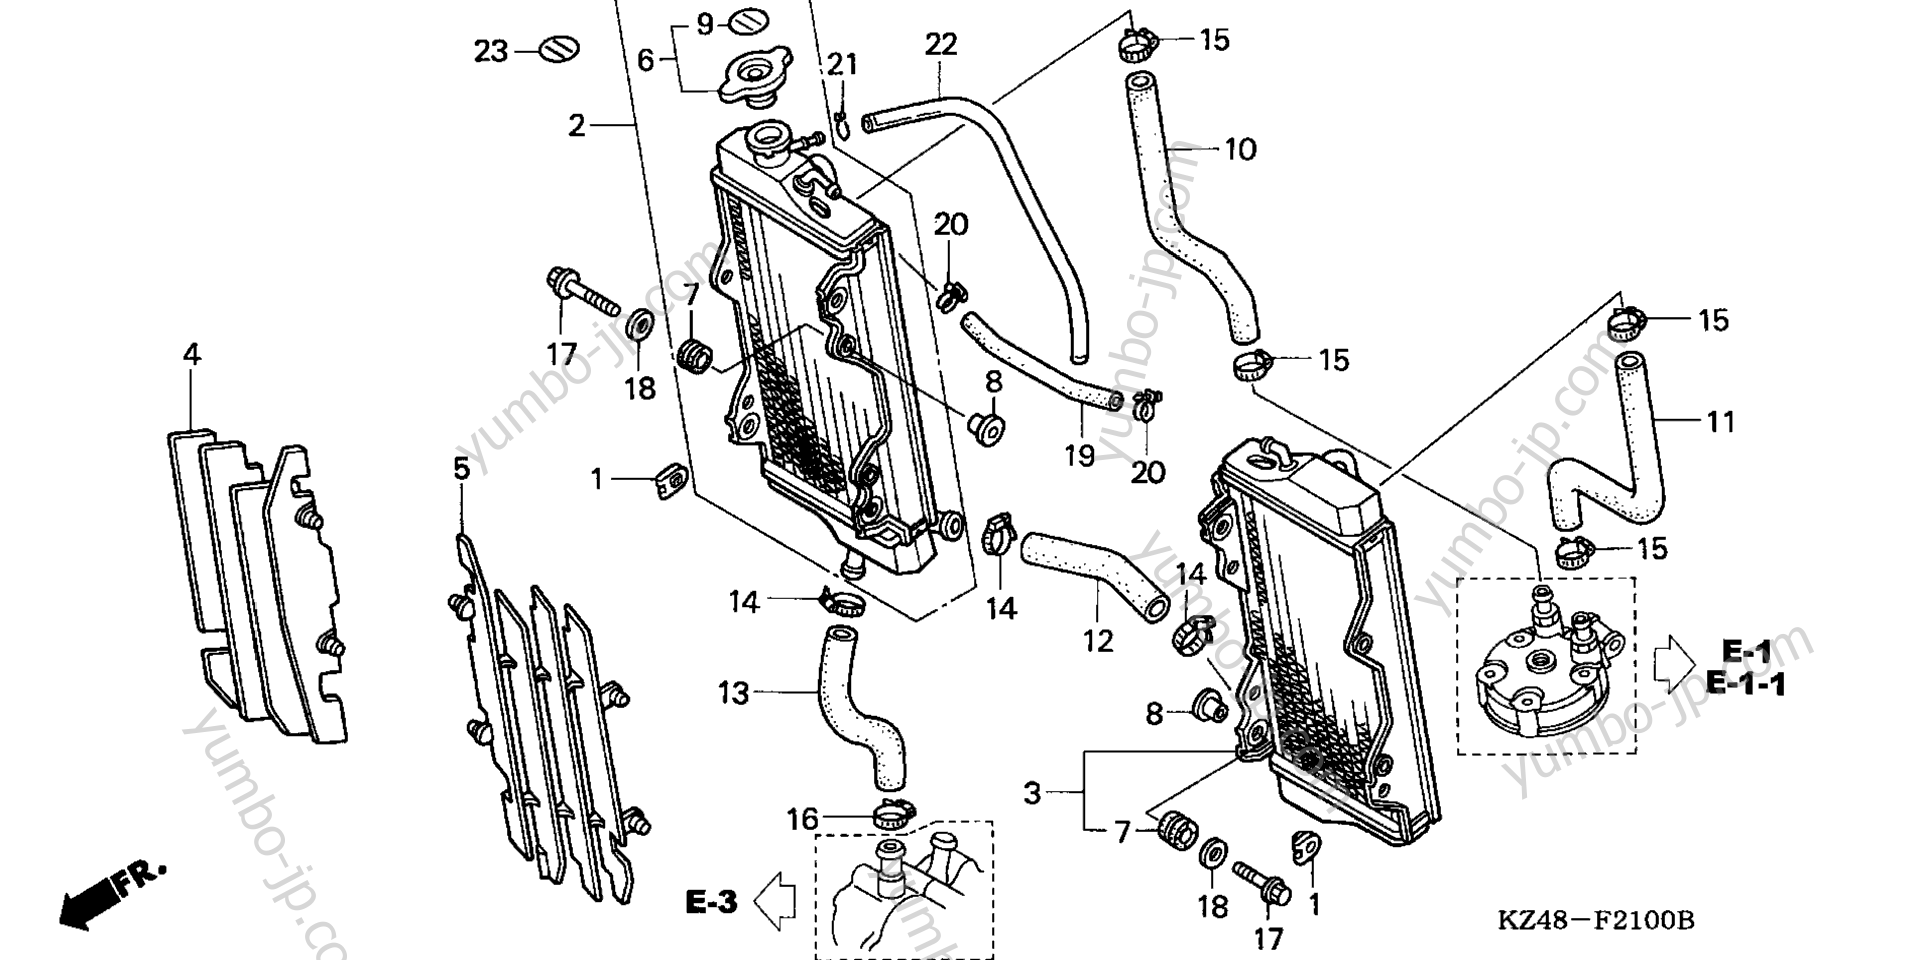 RADIATOR ('02-'04) for motorcycles HONDA CR125R A 2003 year